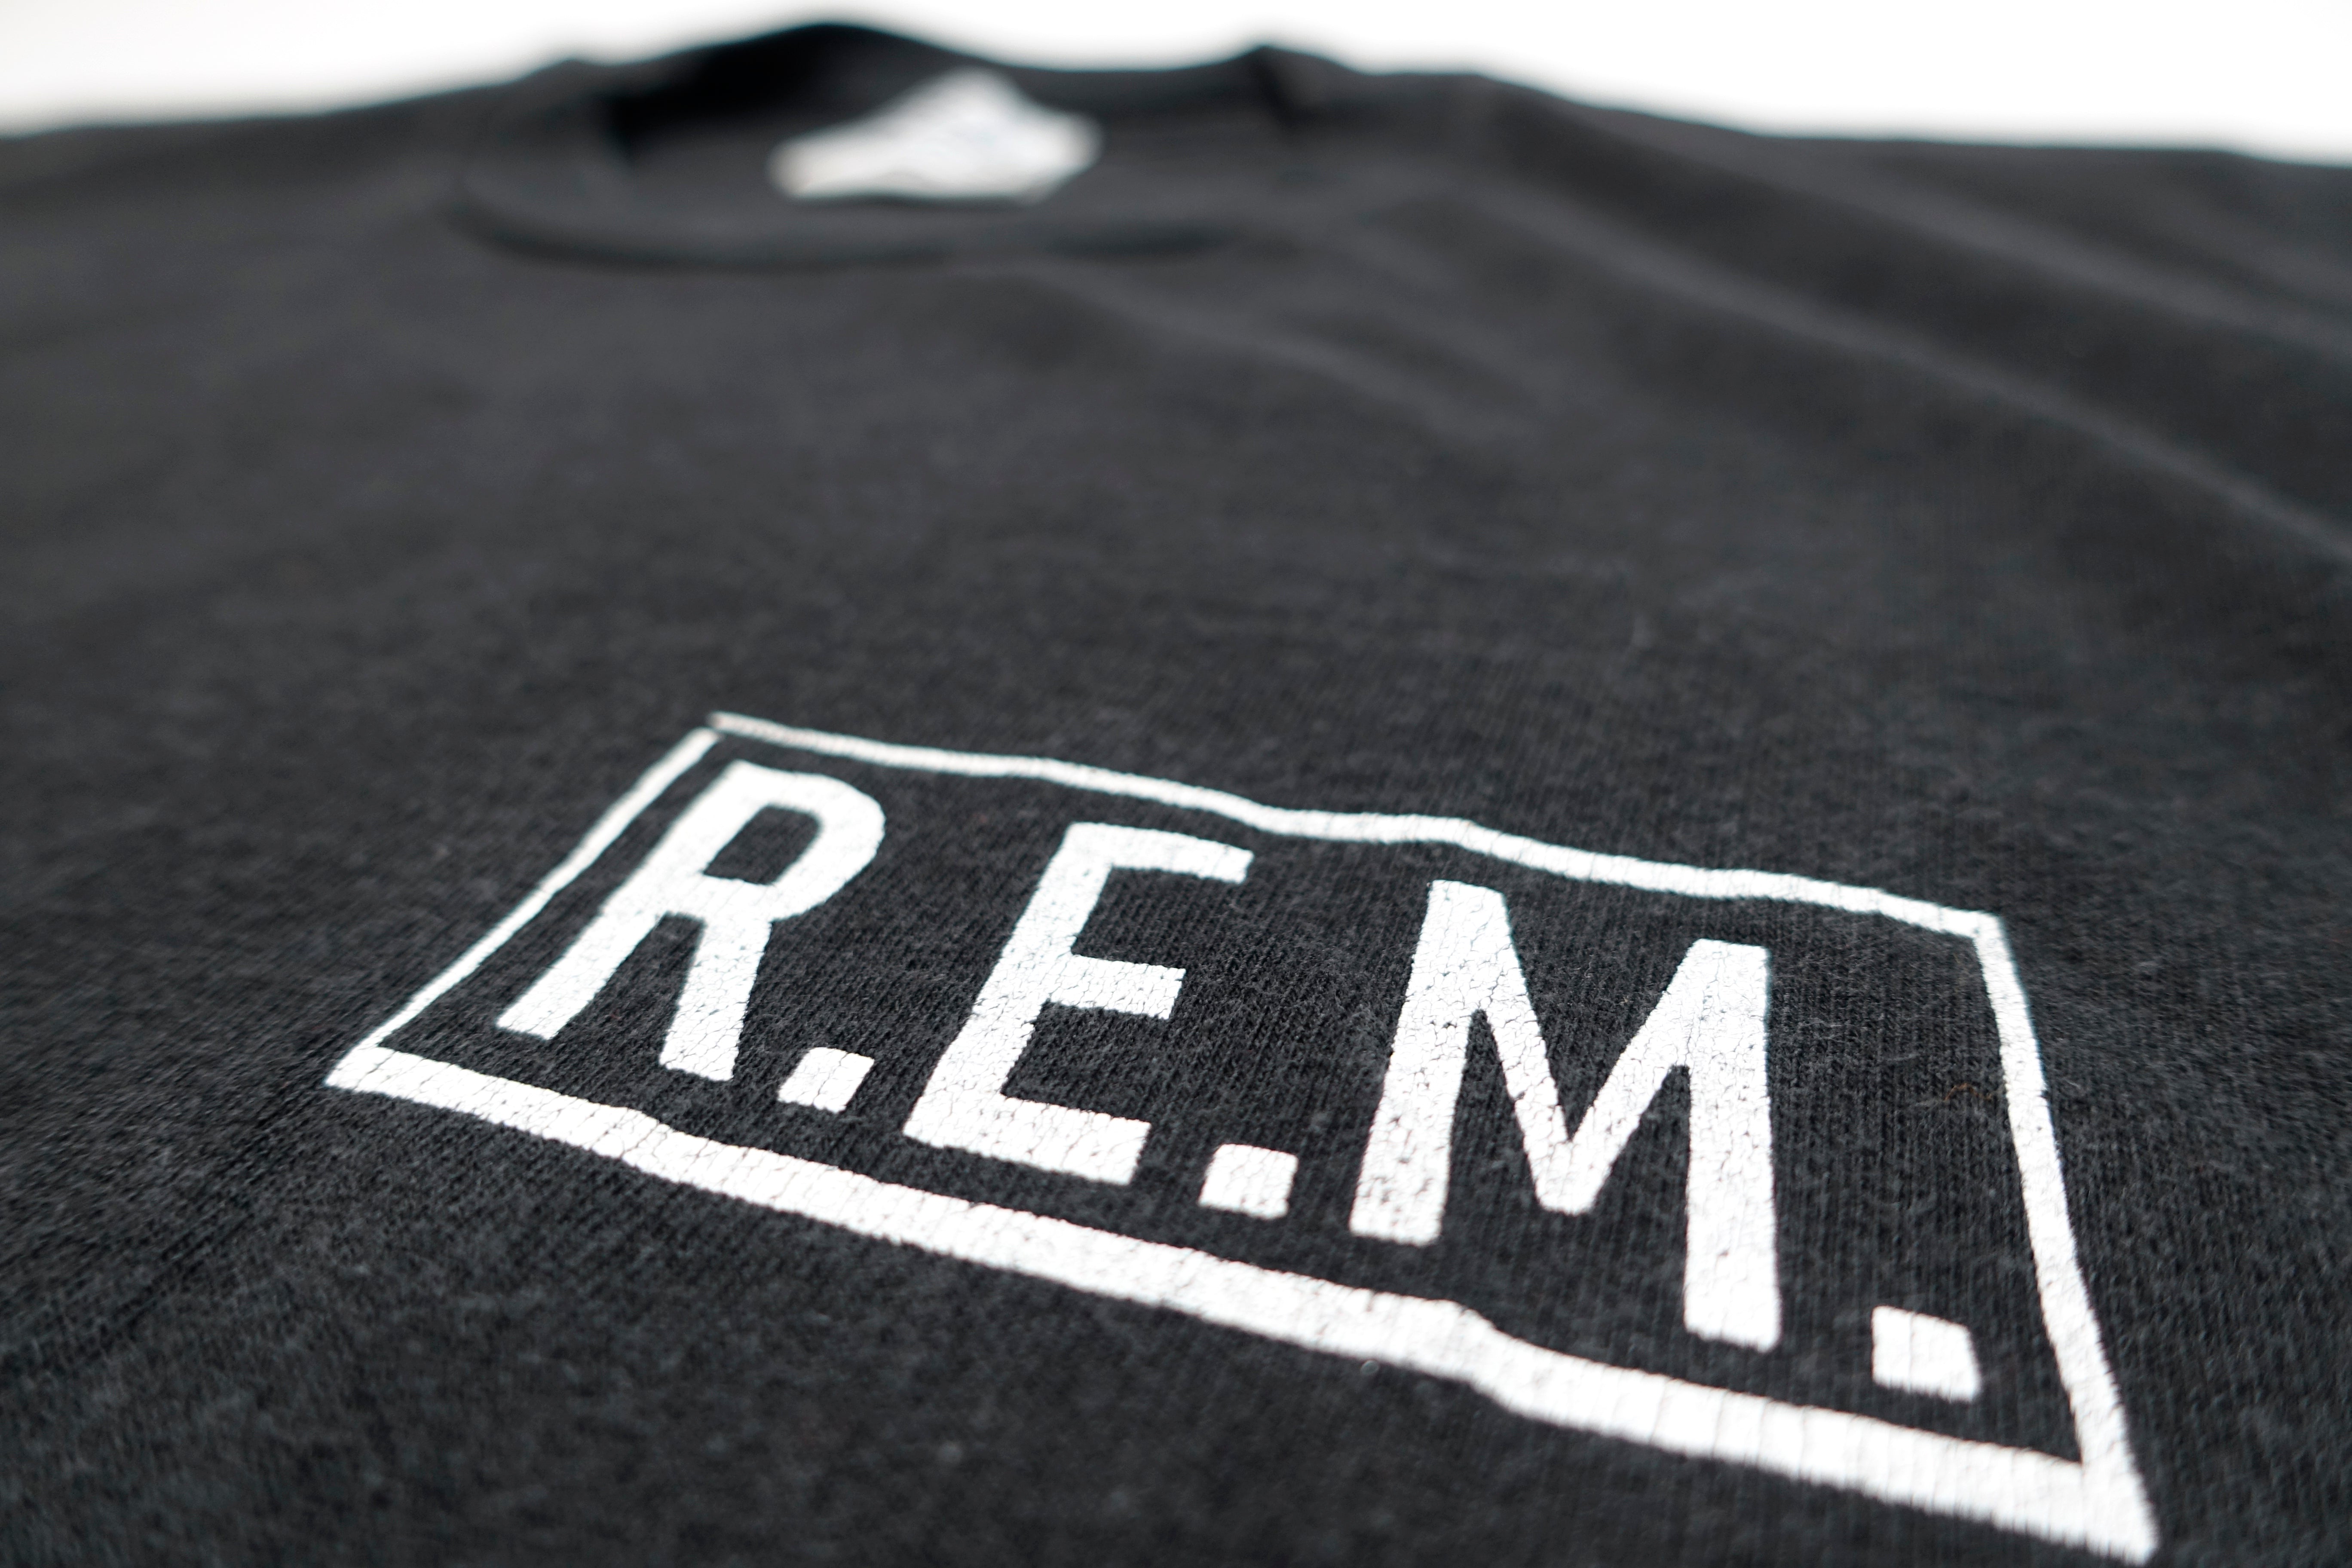 R.E.M. ‎– Gas Station Automatic For The People 1993 Tour Shirt Size XL